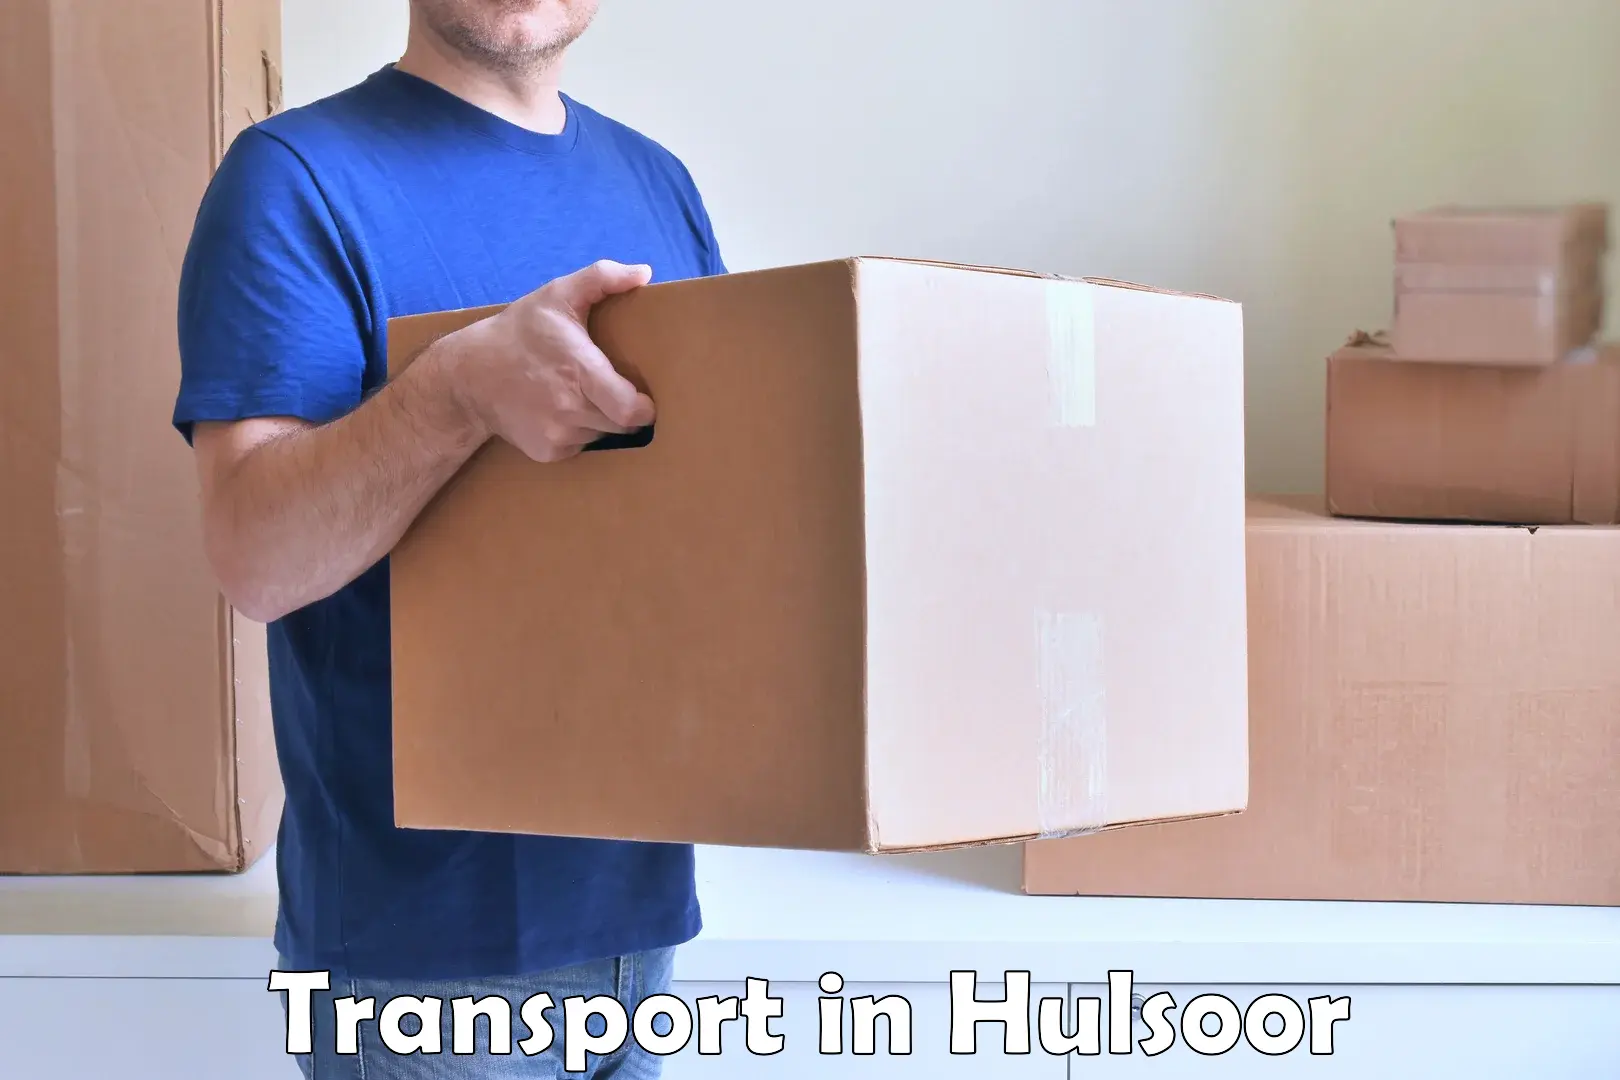 Transport bike from one state to another in Hulsoor